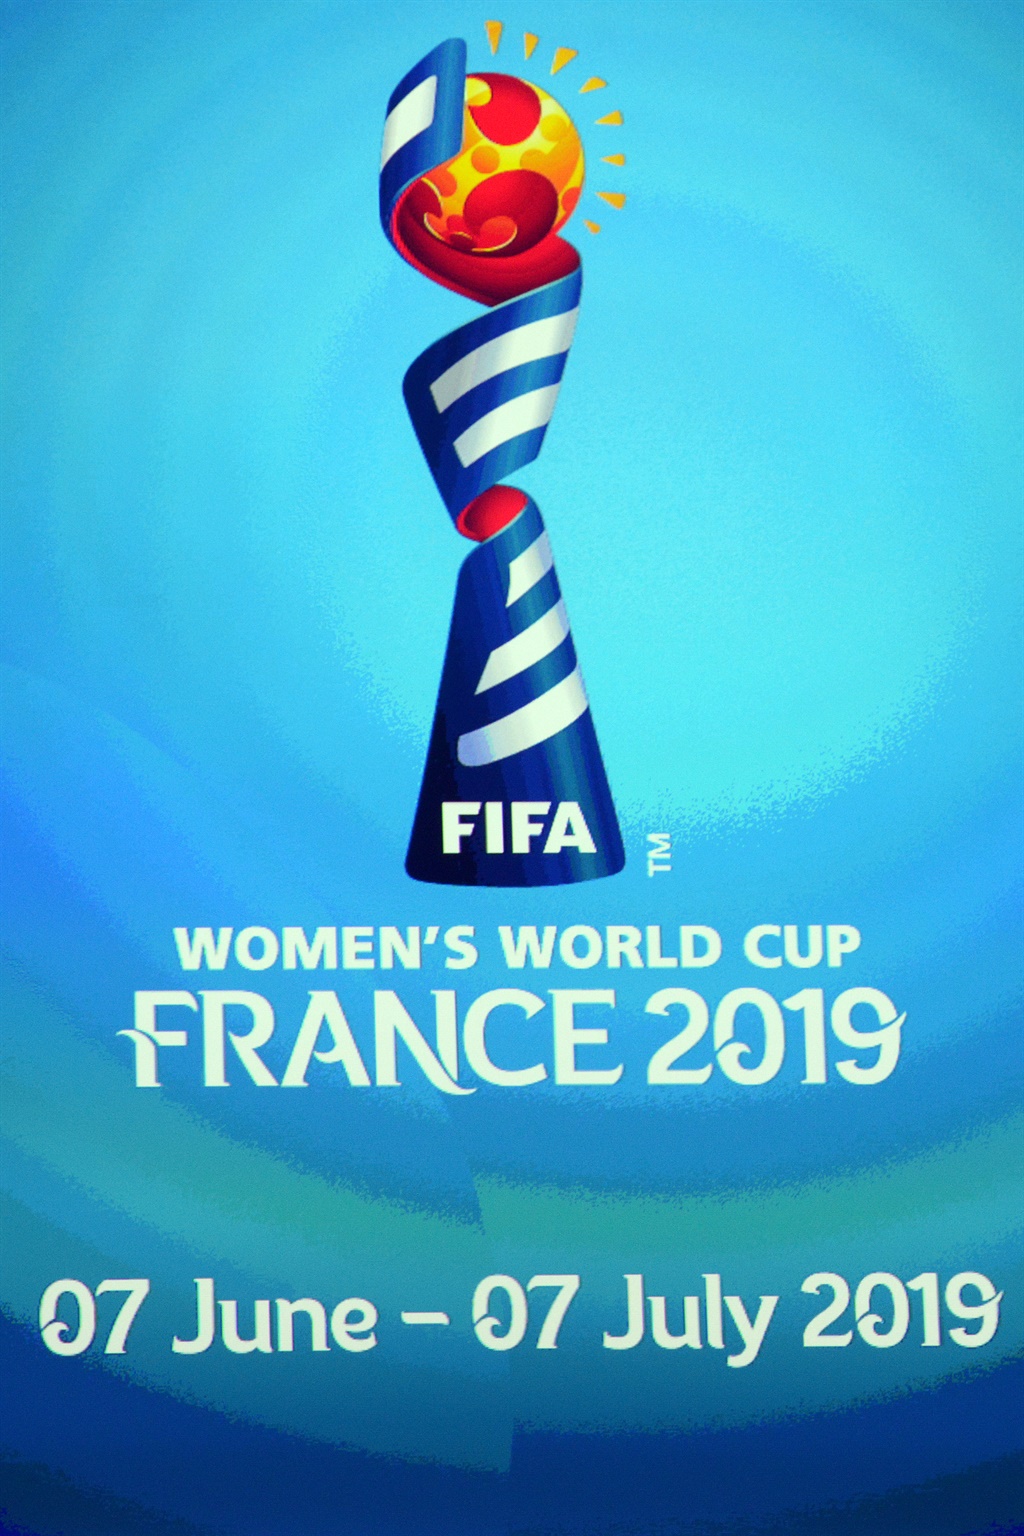 The Official emblem of the FIFA womens world cup France 2019 symbolised by a ball poised to cast its light on the elite of womens football during the Presentation World Cup 2019 in France 